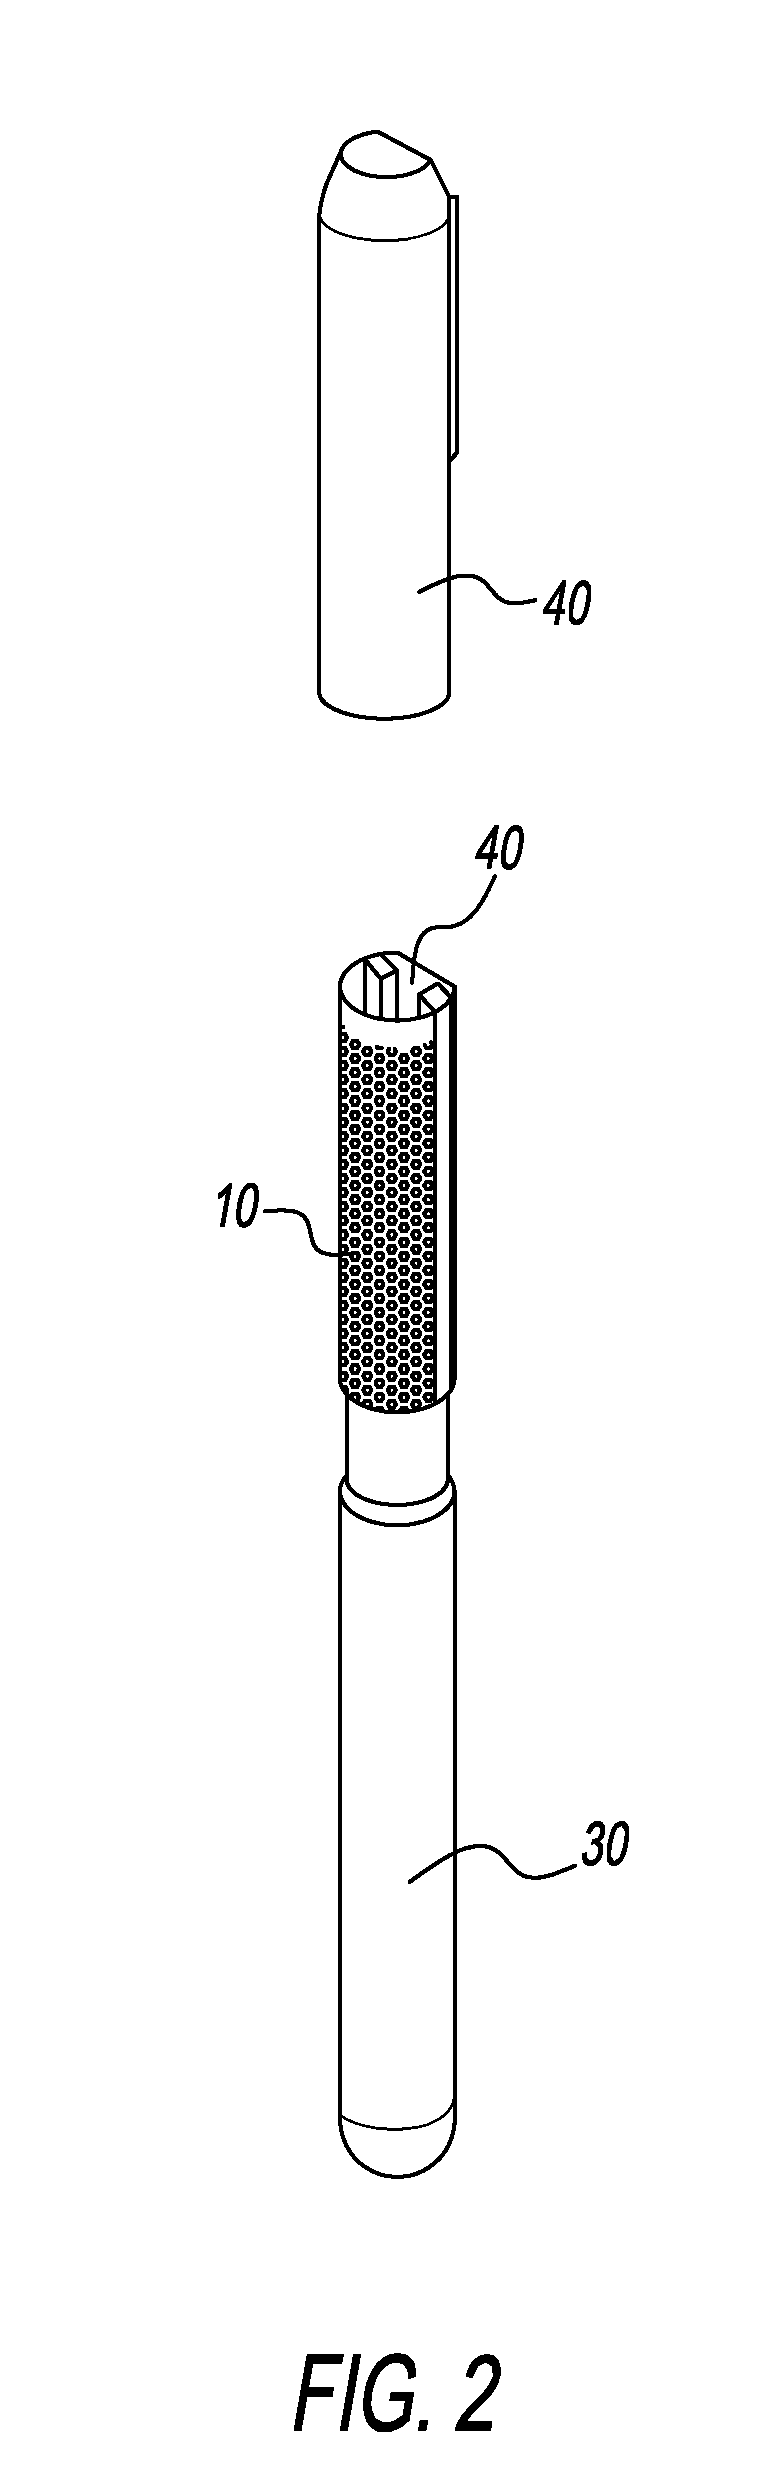 Apparatus For Preventing And Correcting Pseudofolliculitis Barbae, Pseudofolliculitis Pubis, And Pseudofolliculitis Nuchae